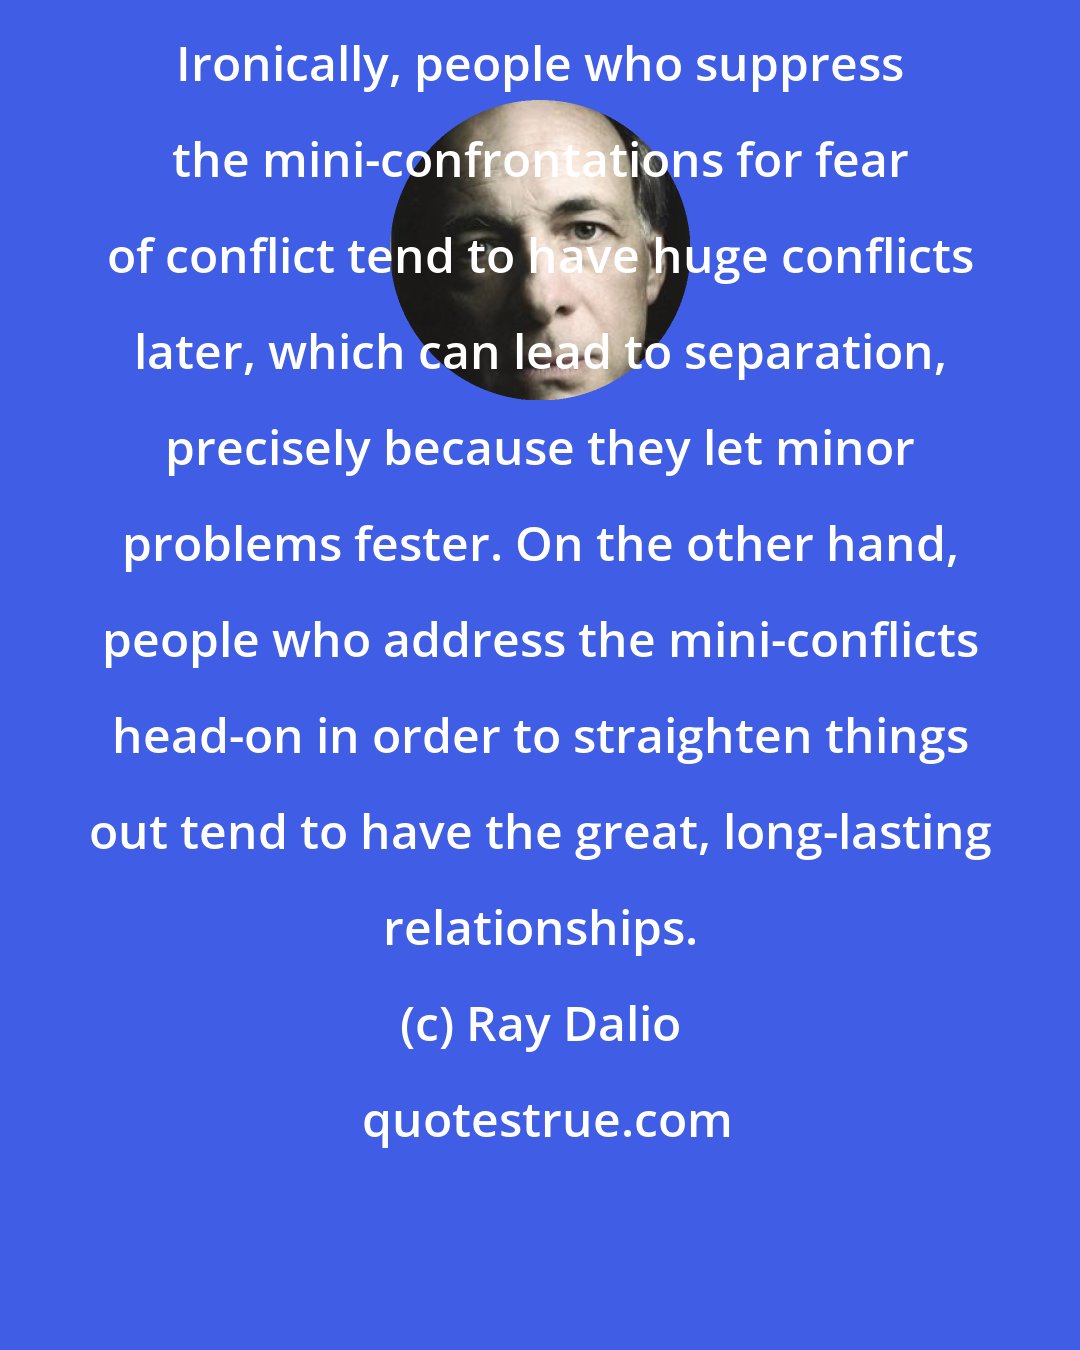 Ray Dalio: Ironically, people who suppress the mini-confrontations for fear of conflict tend to have huge conflicts later, which can lead to separation, precisely because they let minor problems fester. On the other hand, people who address the mini-conflicts head-on in order to straighten things out tend to have the great, long-lasting relationships.